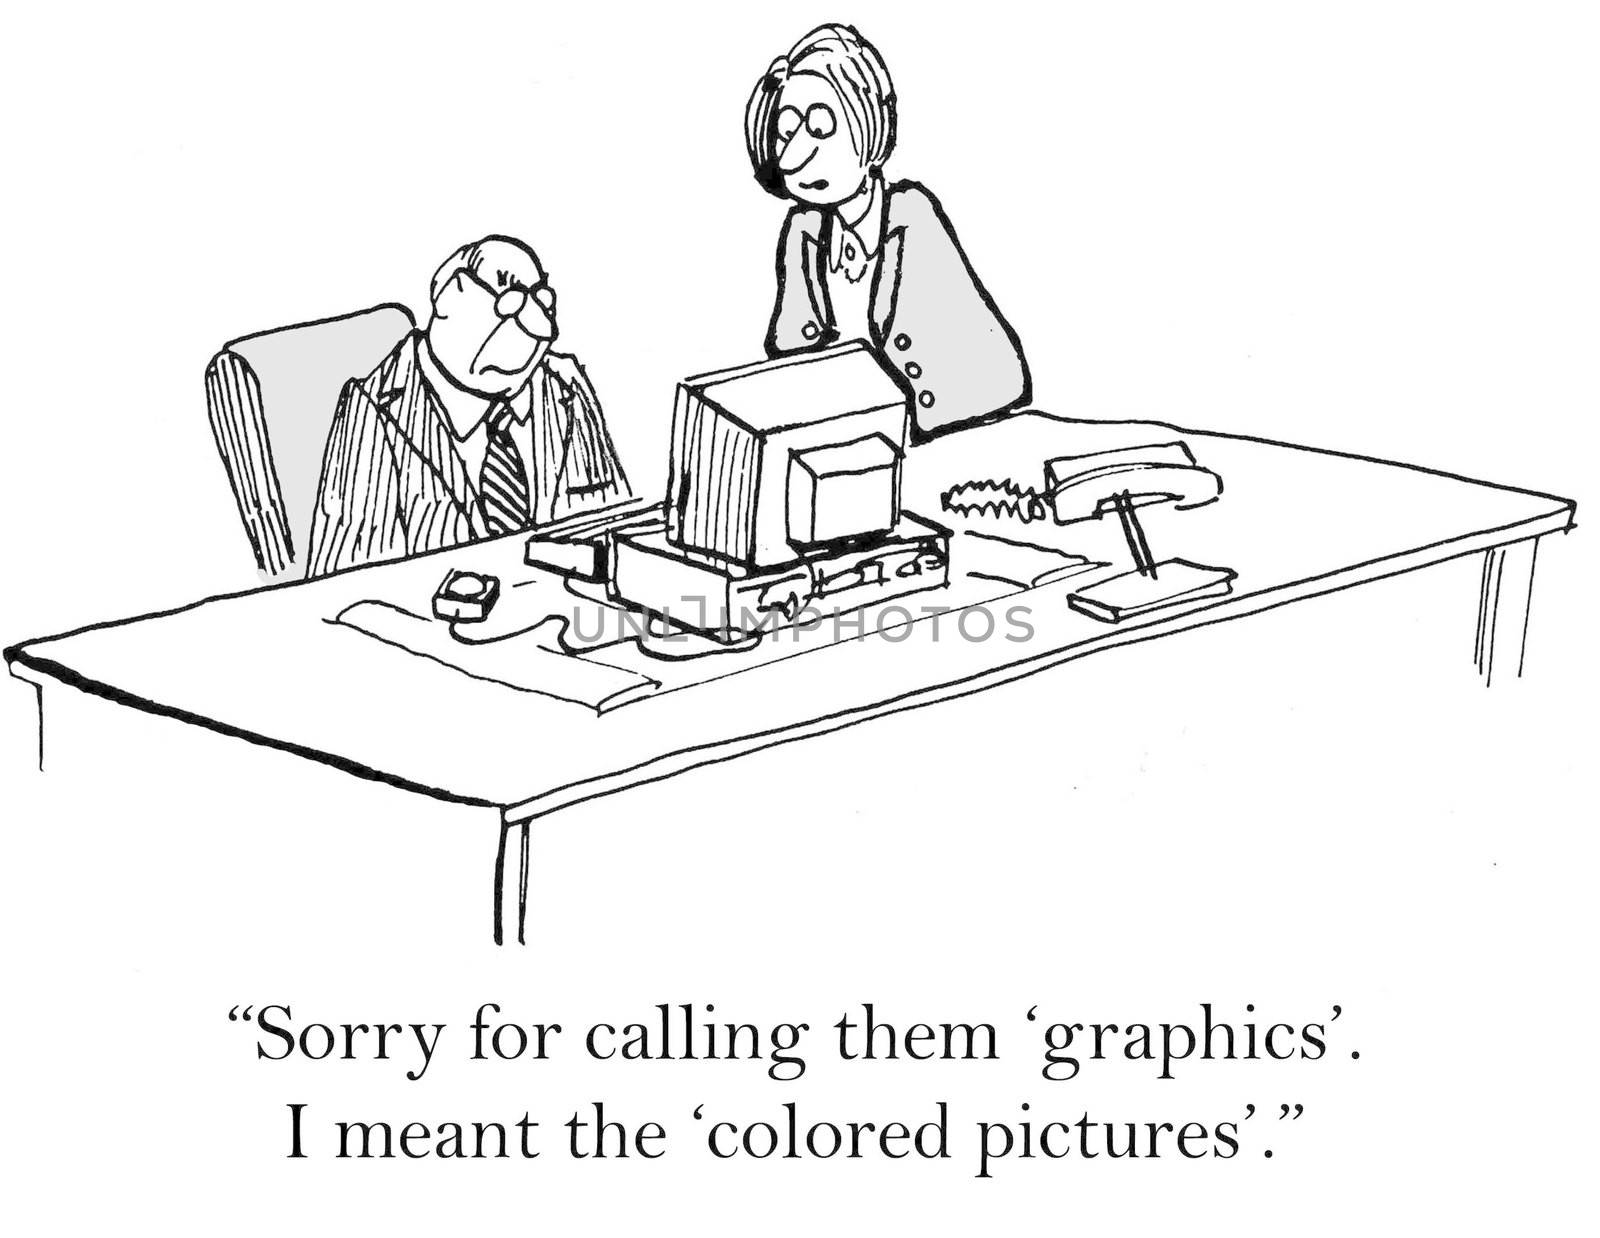 "Sorry for calling them 'graphics'. I meant the 'colored pictures'."